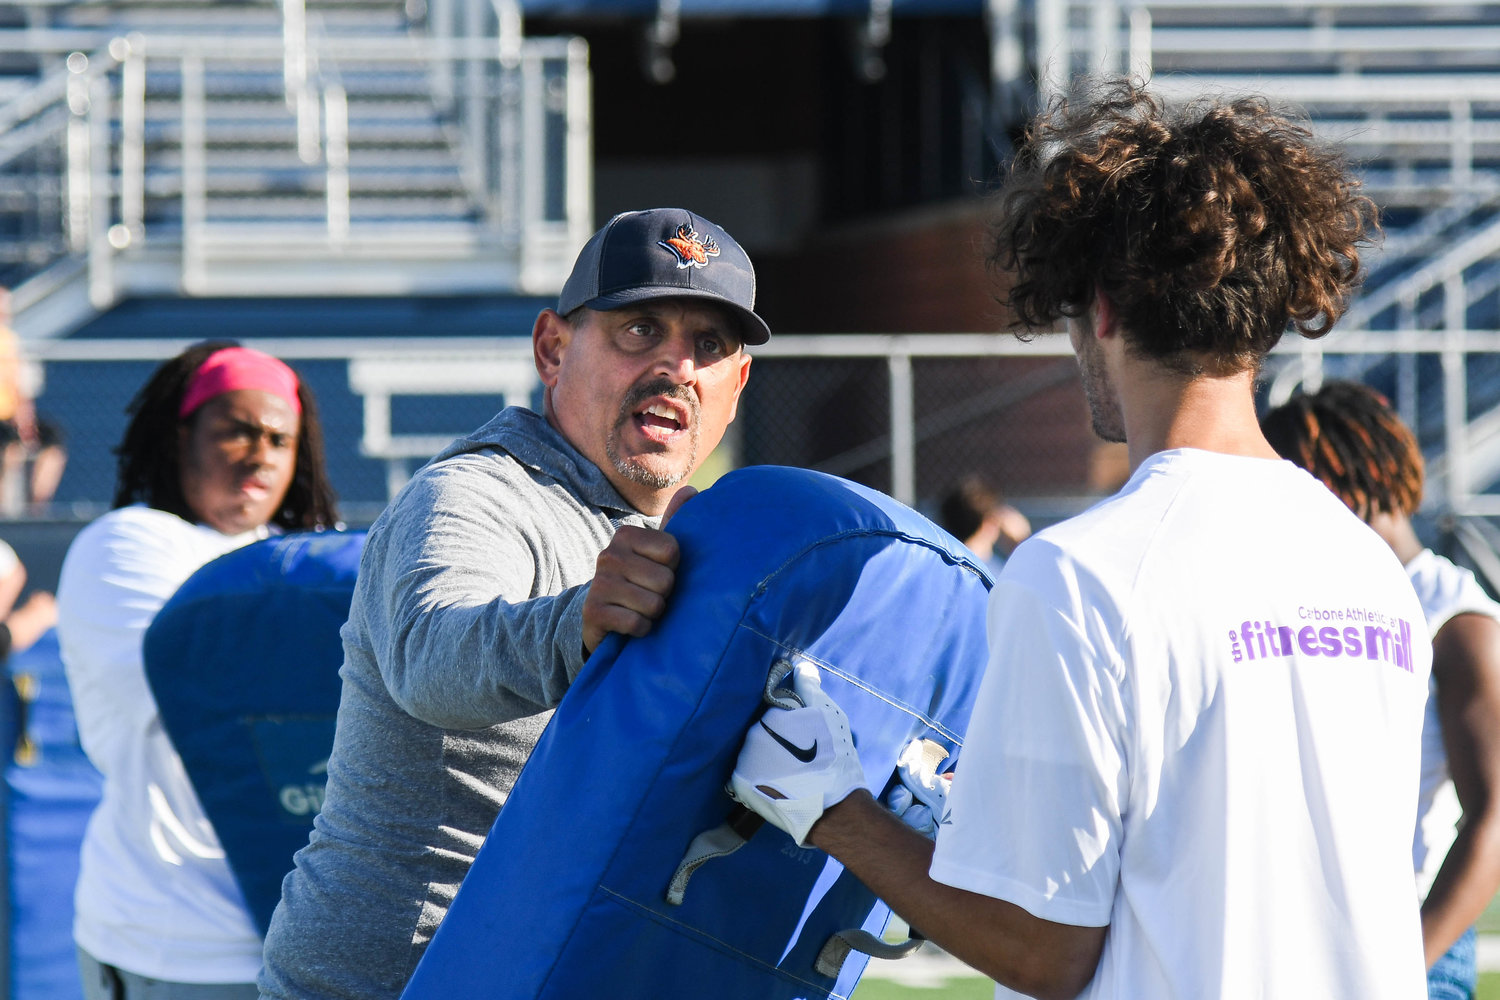 CAMP DRILLS — Utica University football head coach Blaise Faggiano runs drills with players during the fifth annual “A Call to Men” football camp on Tuesday night at Charles A. Gaetano Stadium in Utica. The two-day football camp was sponsored by Kristin’s Fund, a non-profit organization dedicated to creating safer communities through domestic violence prevention, Faggiano and the Pioneers staff.